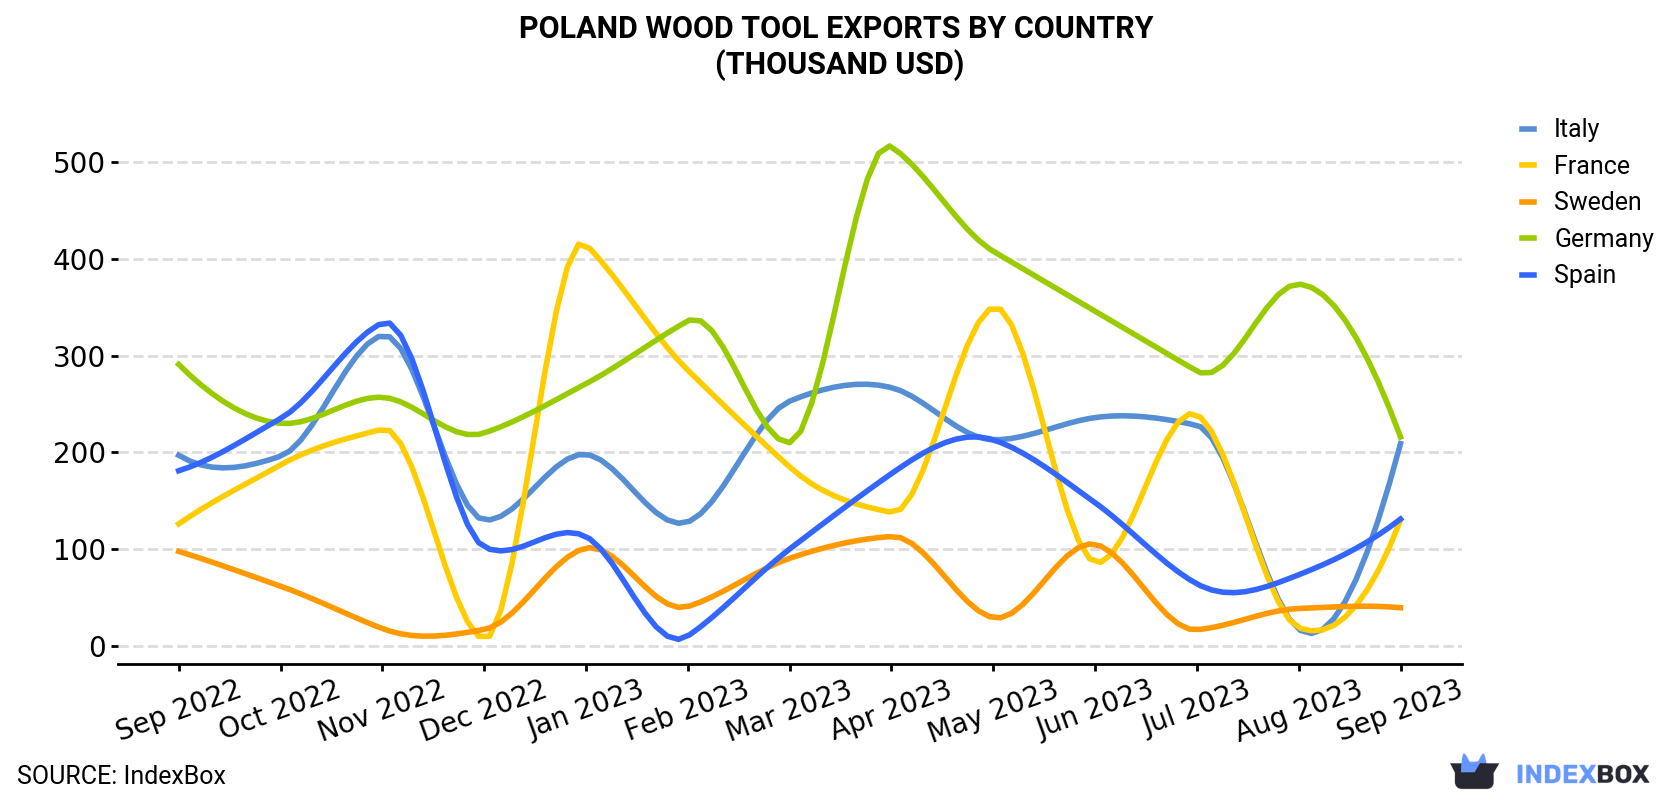 Poland Wood Tool Exports By Country (Thousand USD)